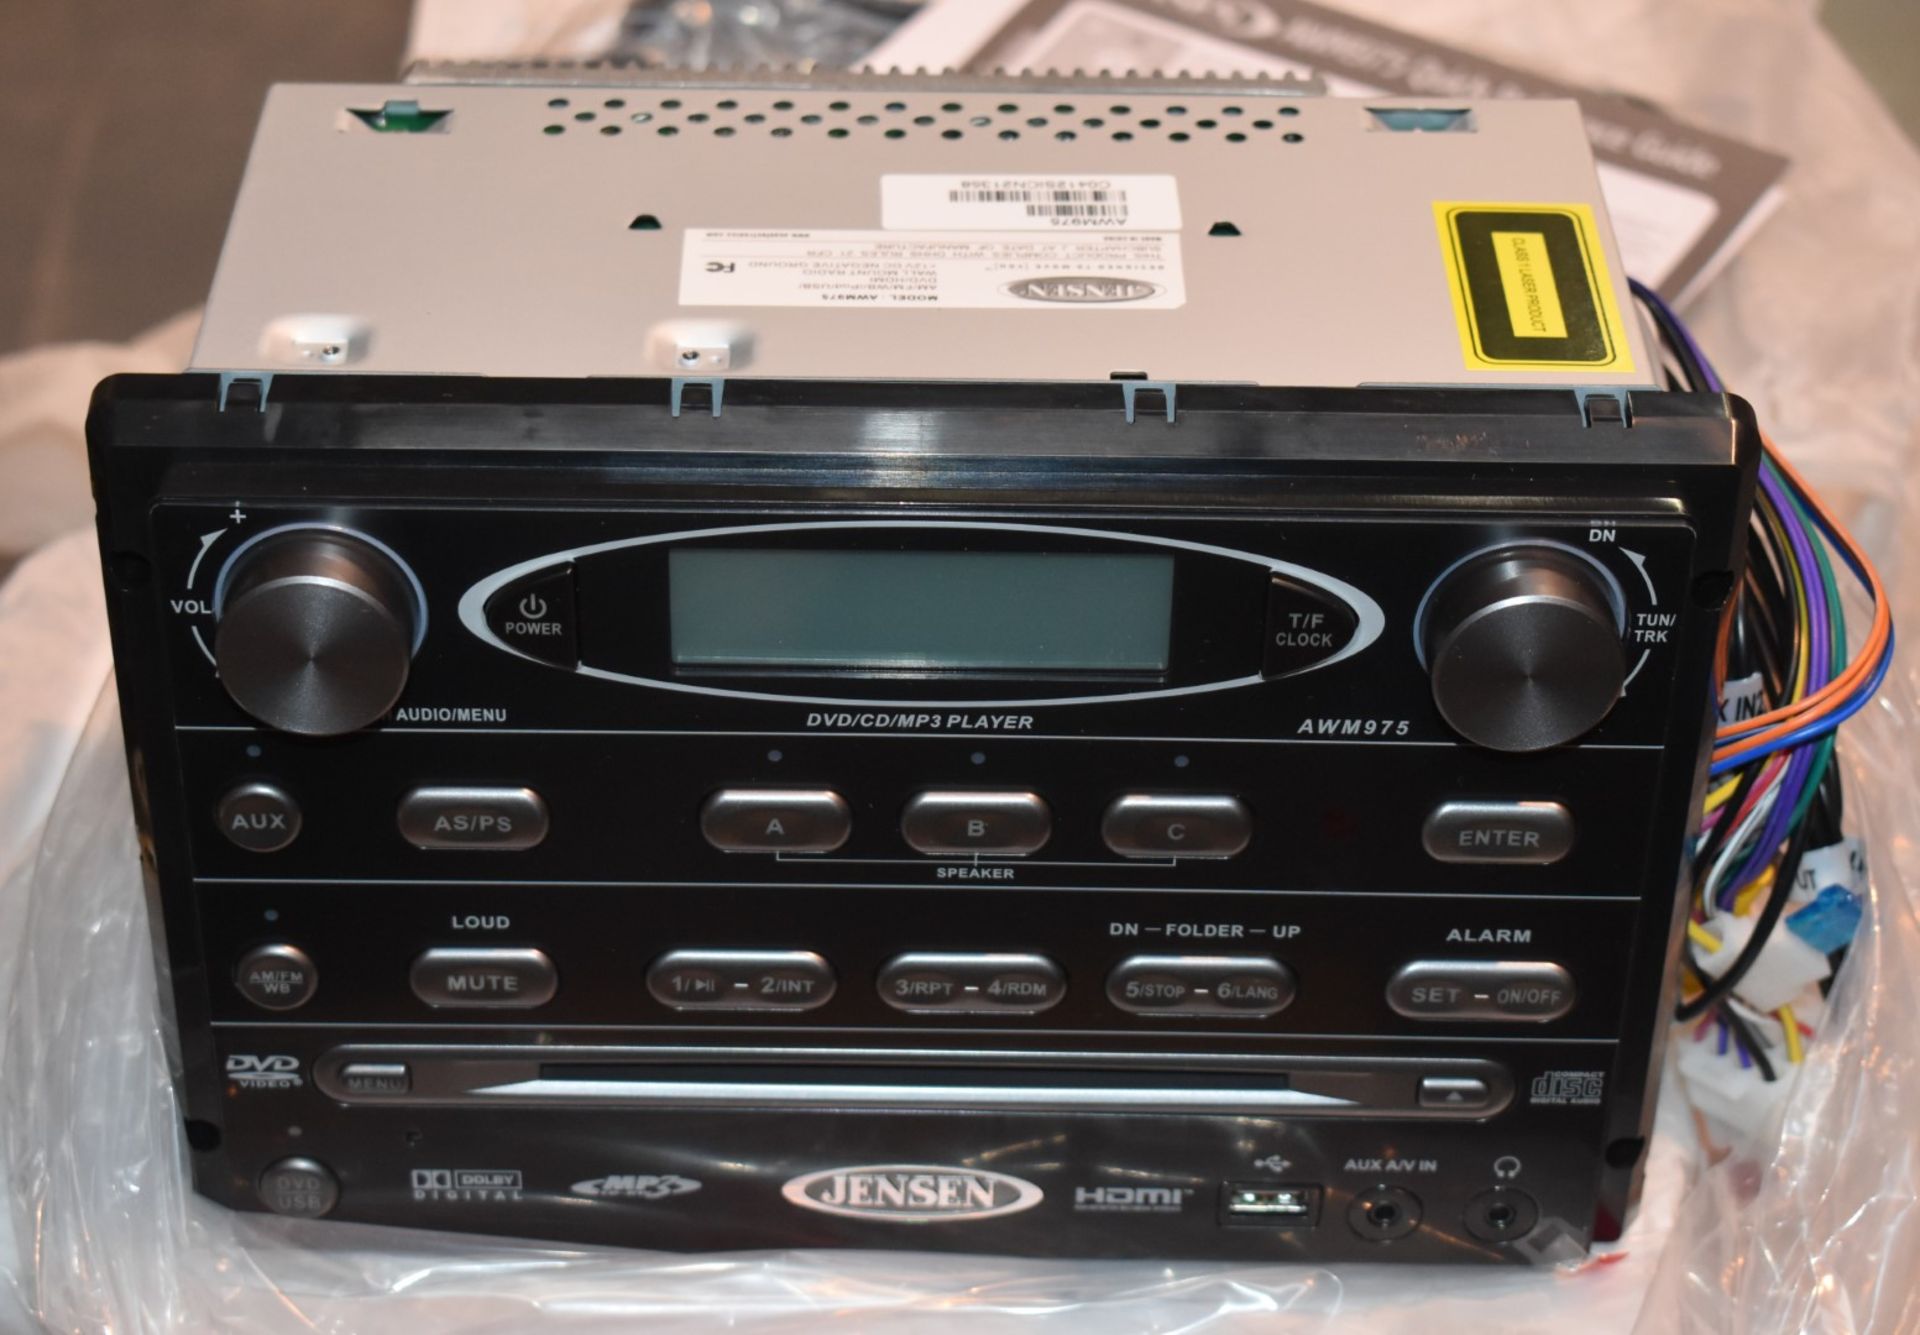 1 x Jenson AWM975 Entertainment System With Two MS5006W Speakers - Features DVD Player, CD, MP3, - Image 5 of 11